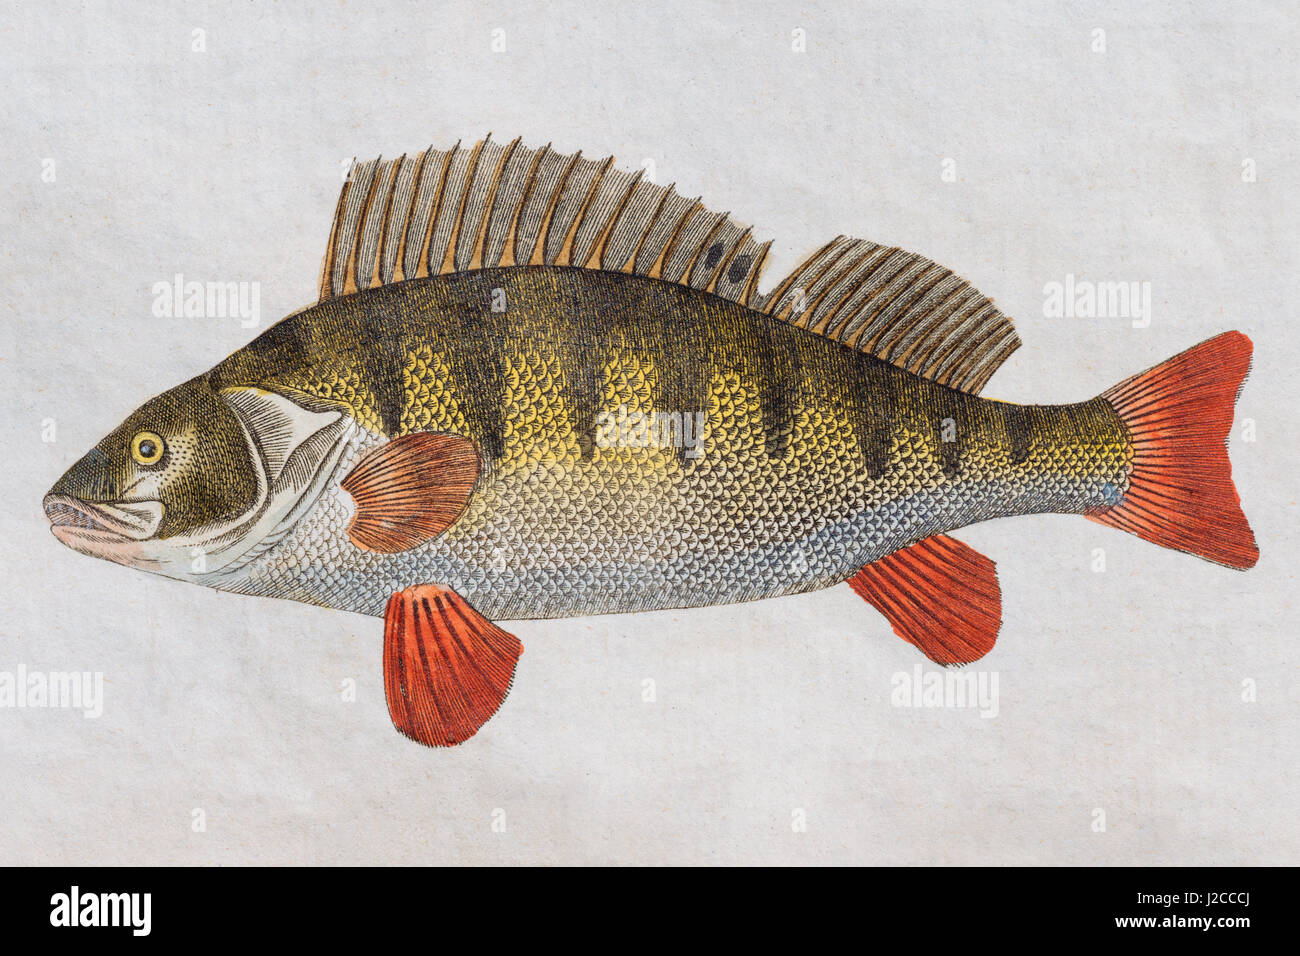 Perch (Perca fluviatilis), hand-colored copper engraving from Friedrich Justin Bertuch picture book for children, Weimar 1795 Stock Photo